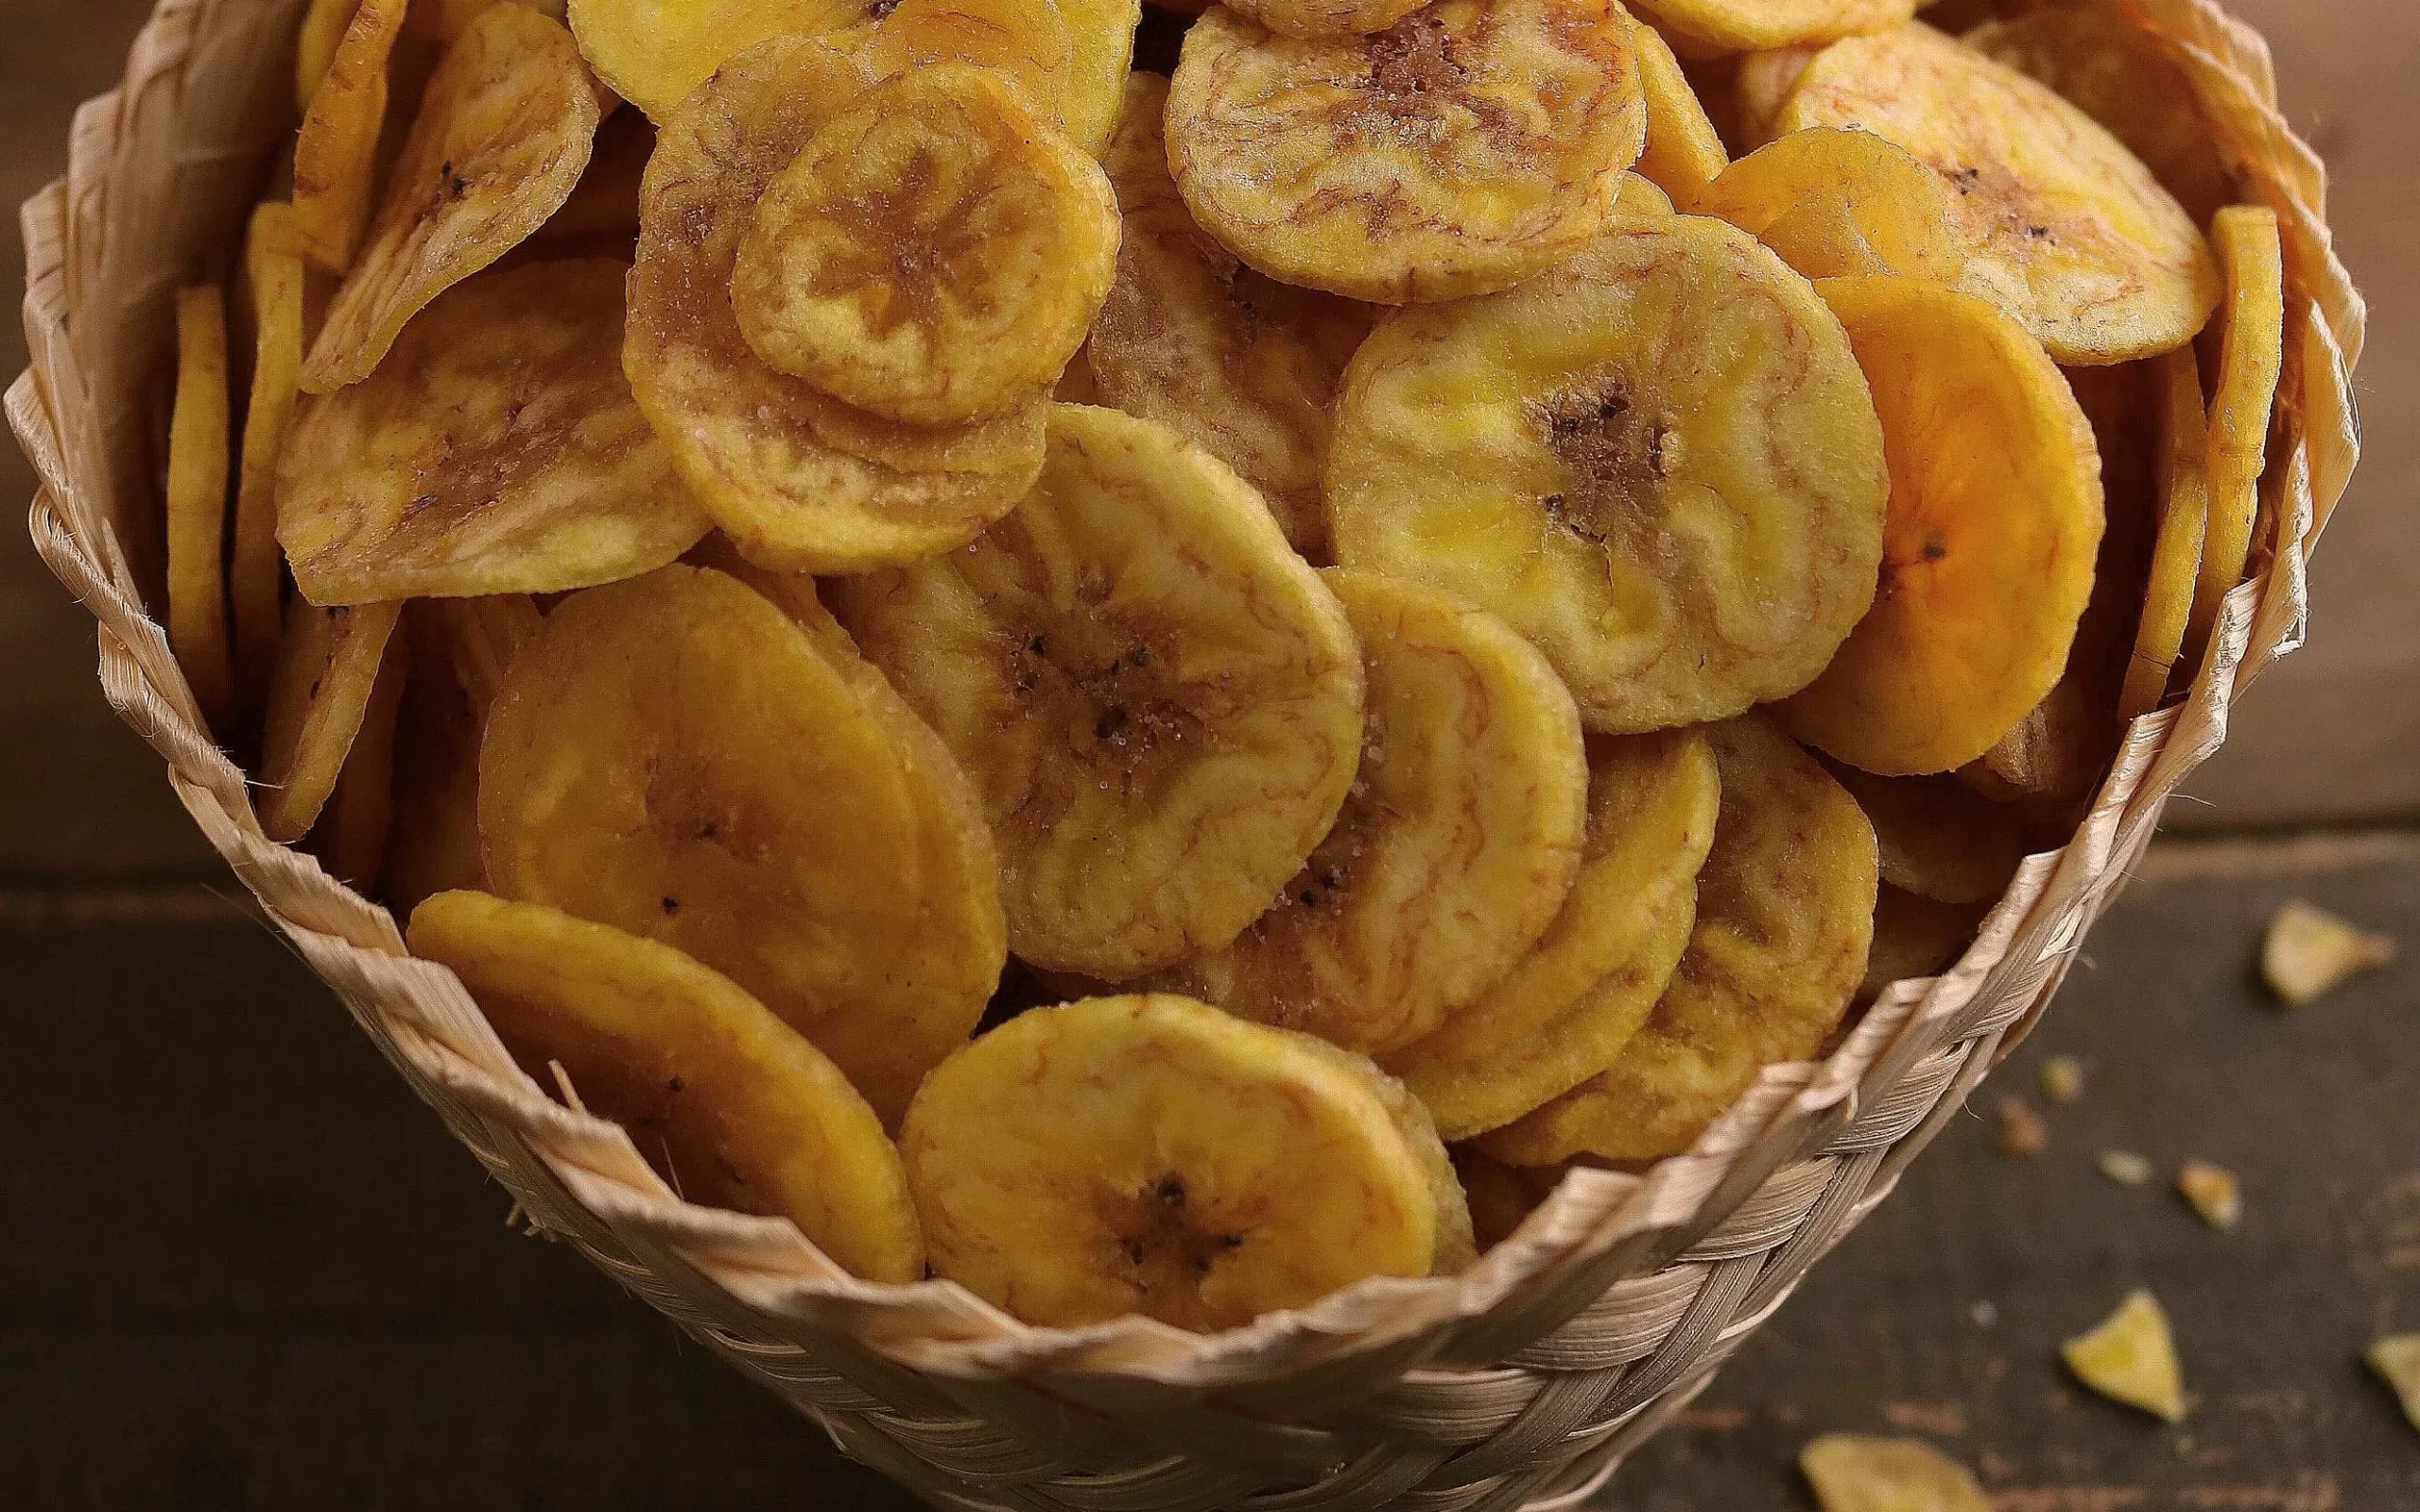 Are banana chips safe for dogs to consume?